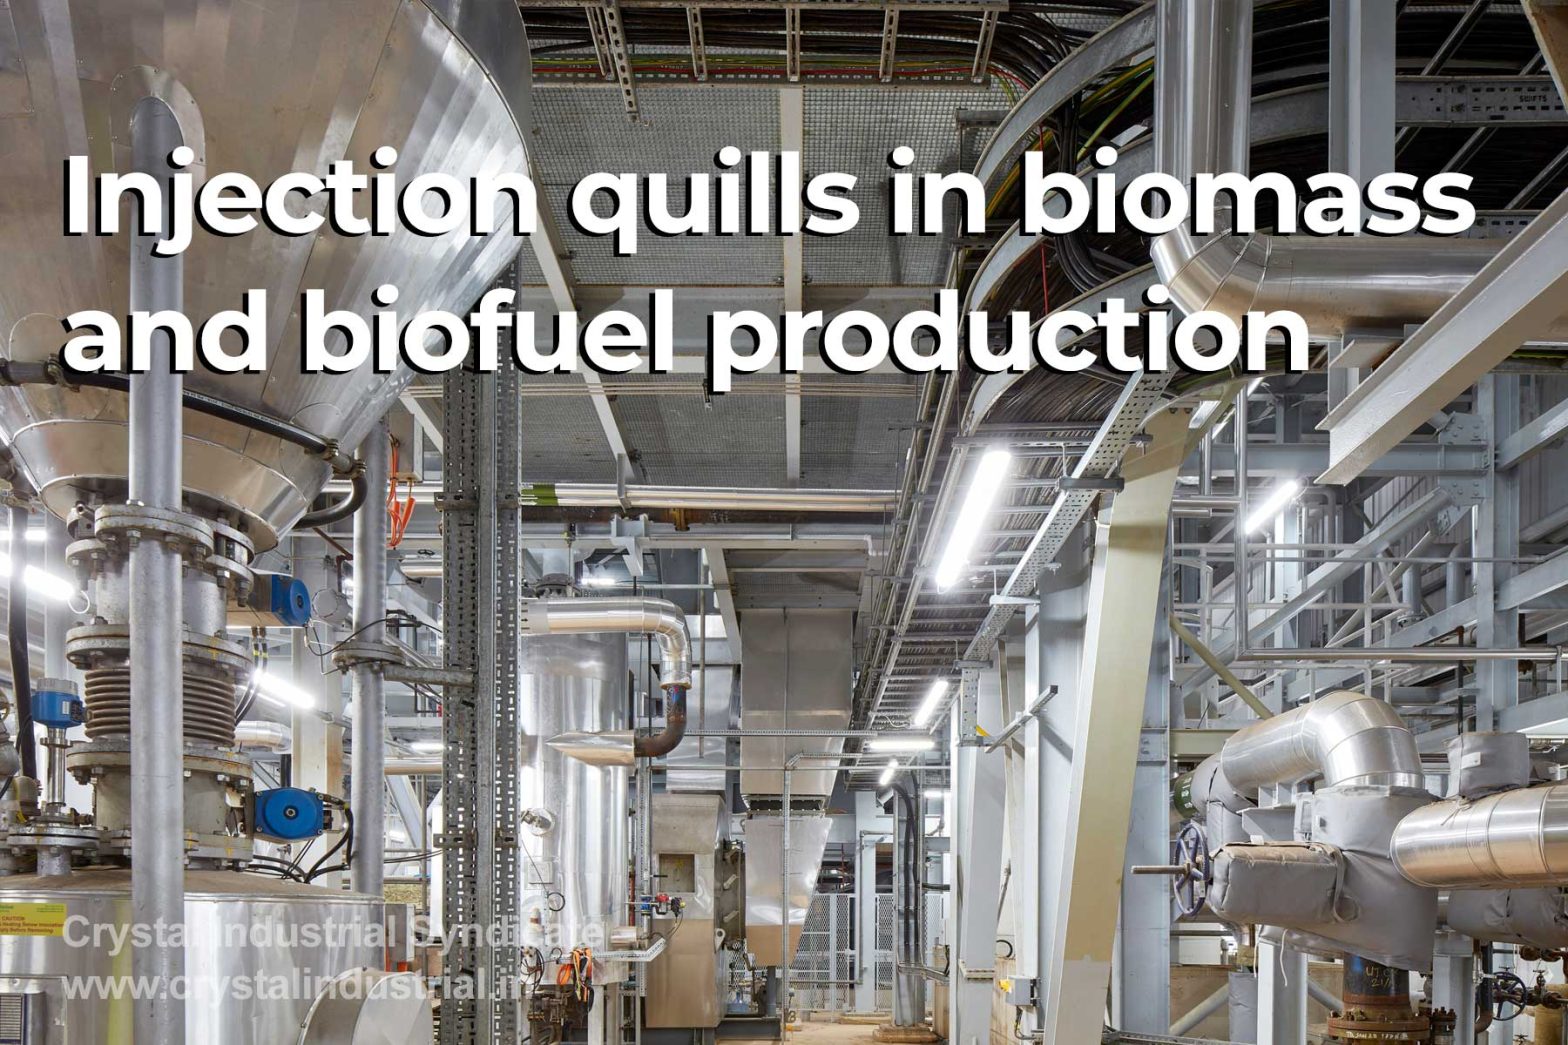 Precise chemical application with injection quills in biomass and biofuel production